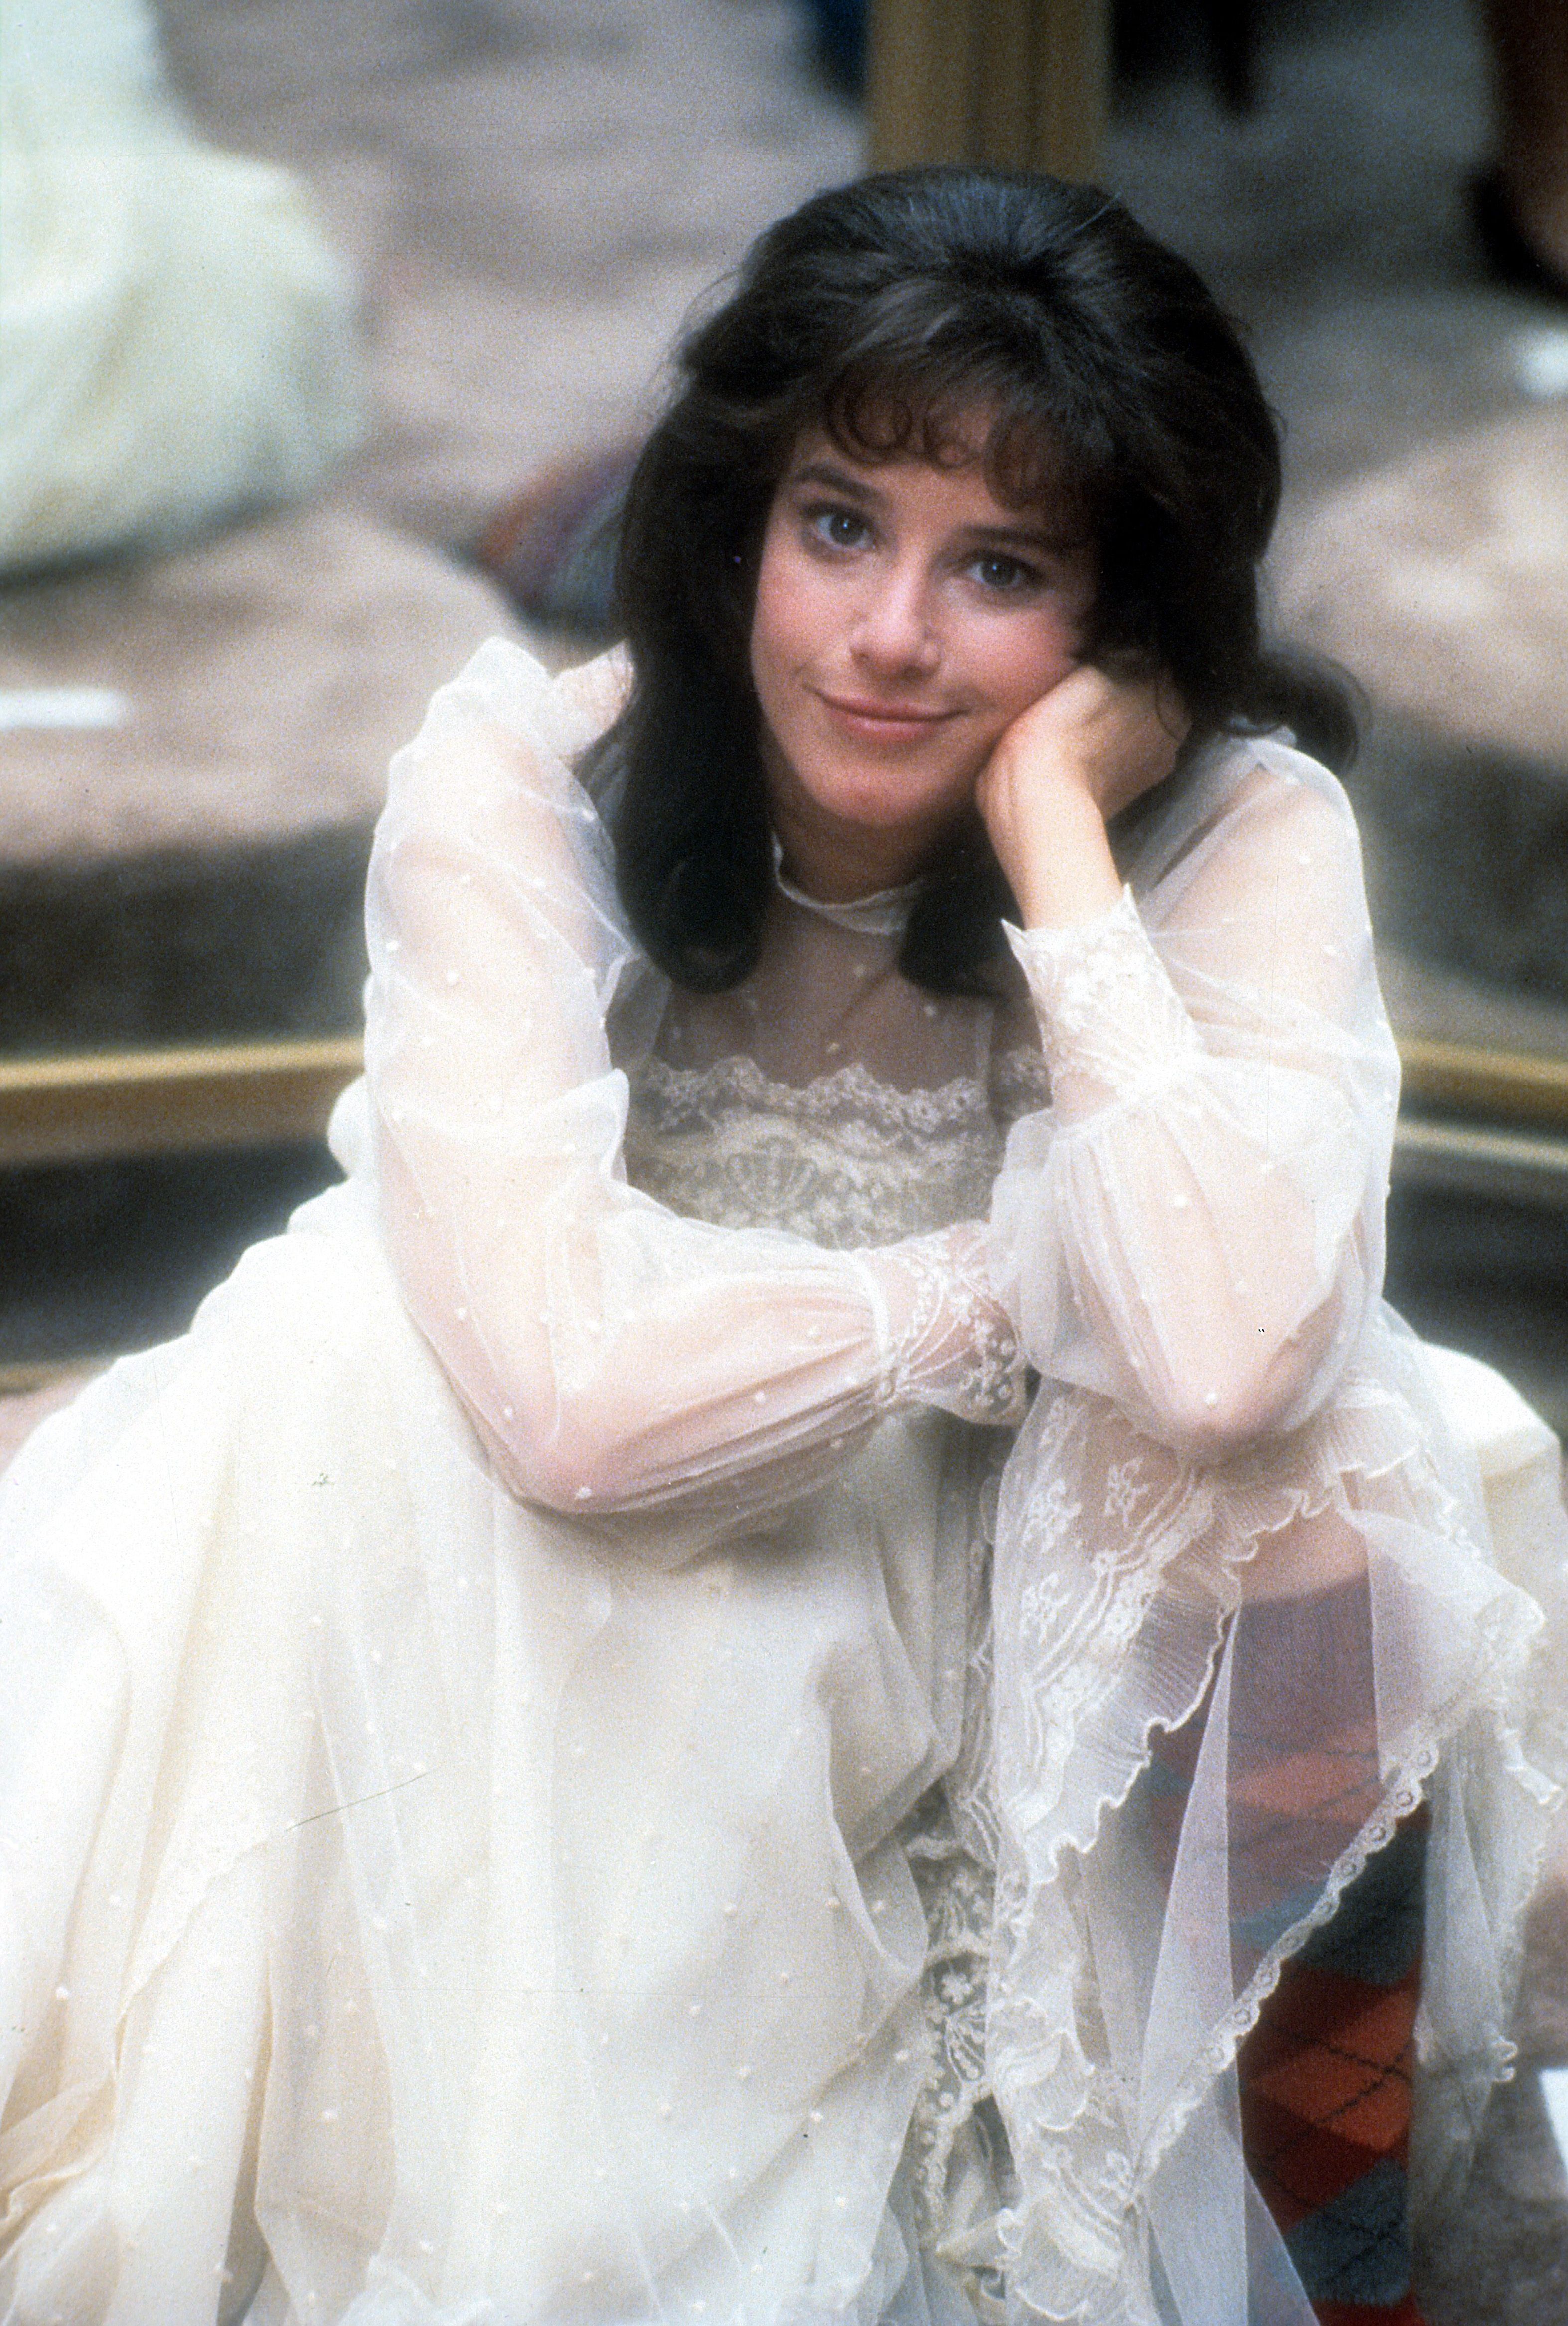 Debra Winger in a scene from the film "Terms of Endearment," circa 1983. | Photo: Getty Images